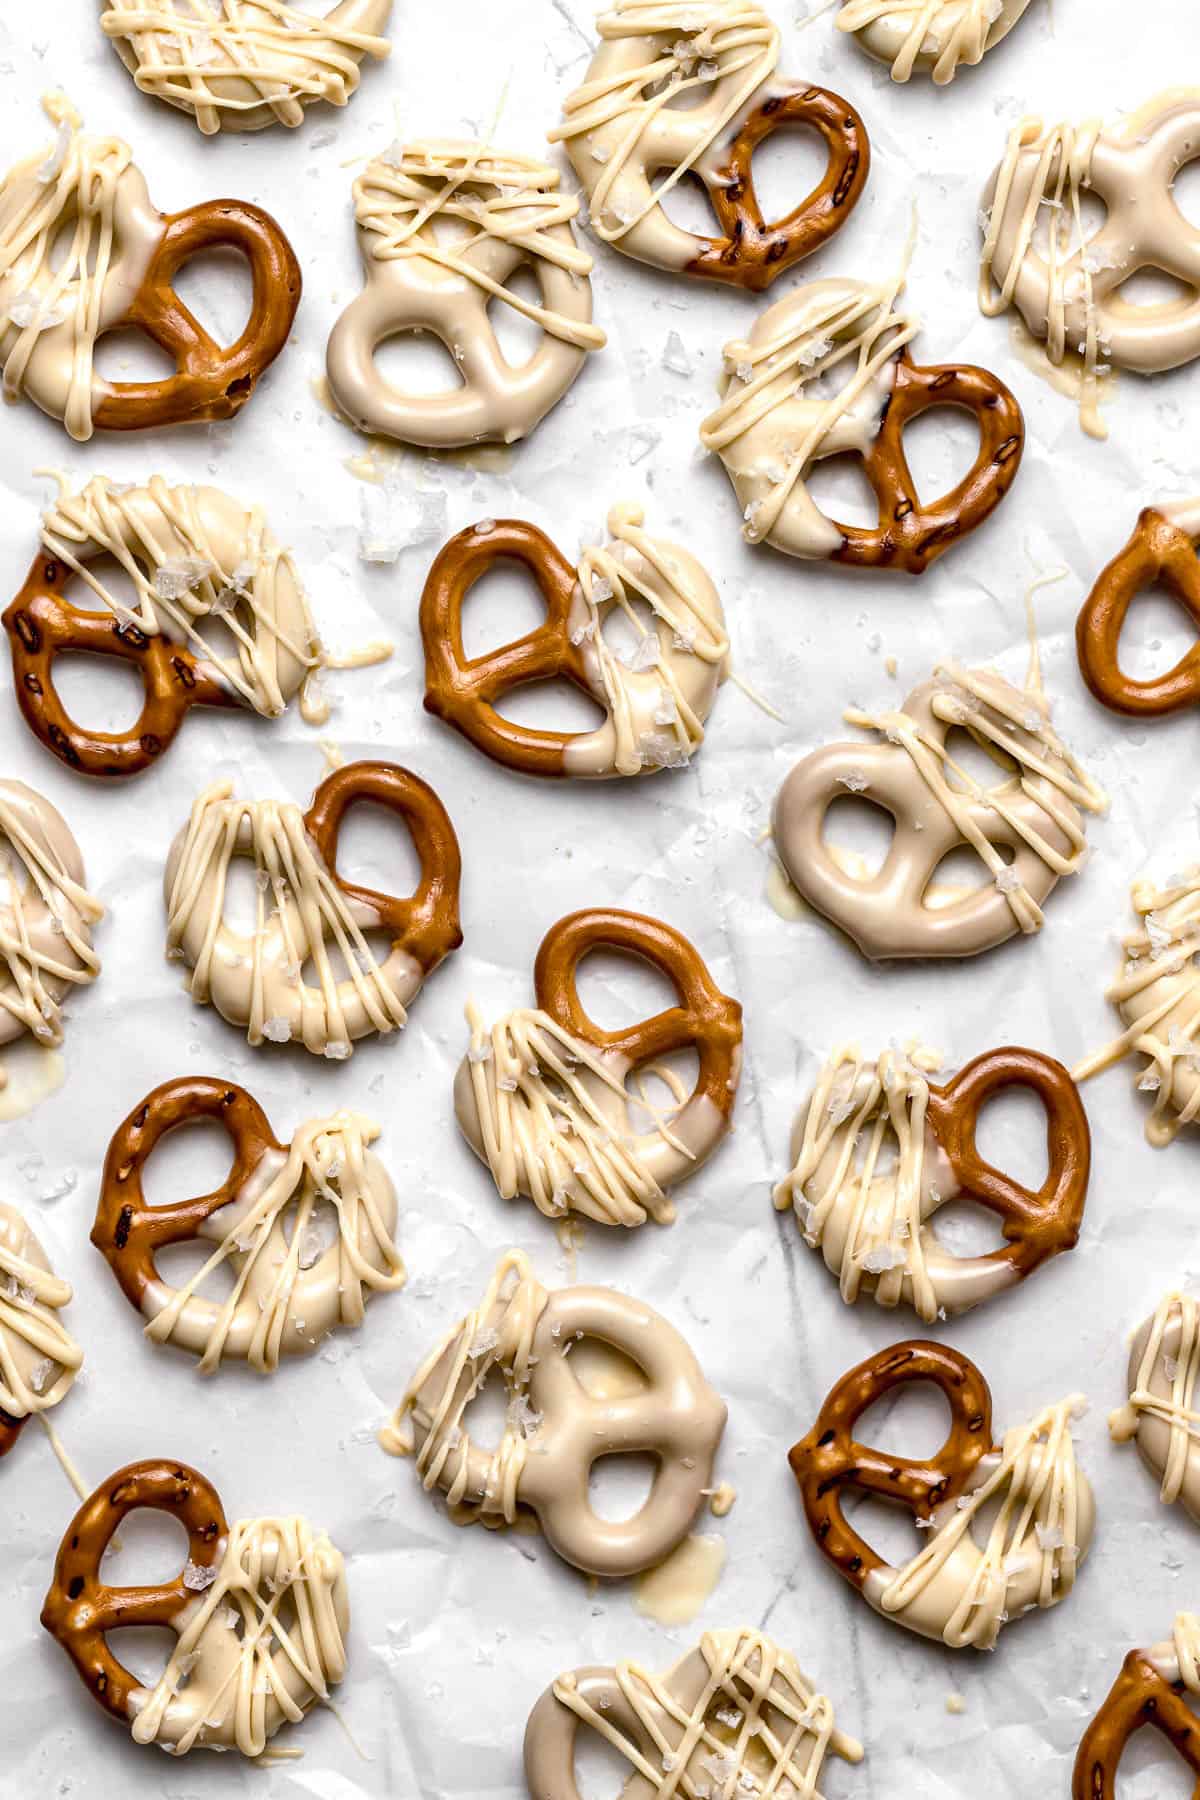 mini pretzels dipped in caramelized white chocolate on parchment paper.